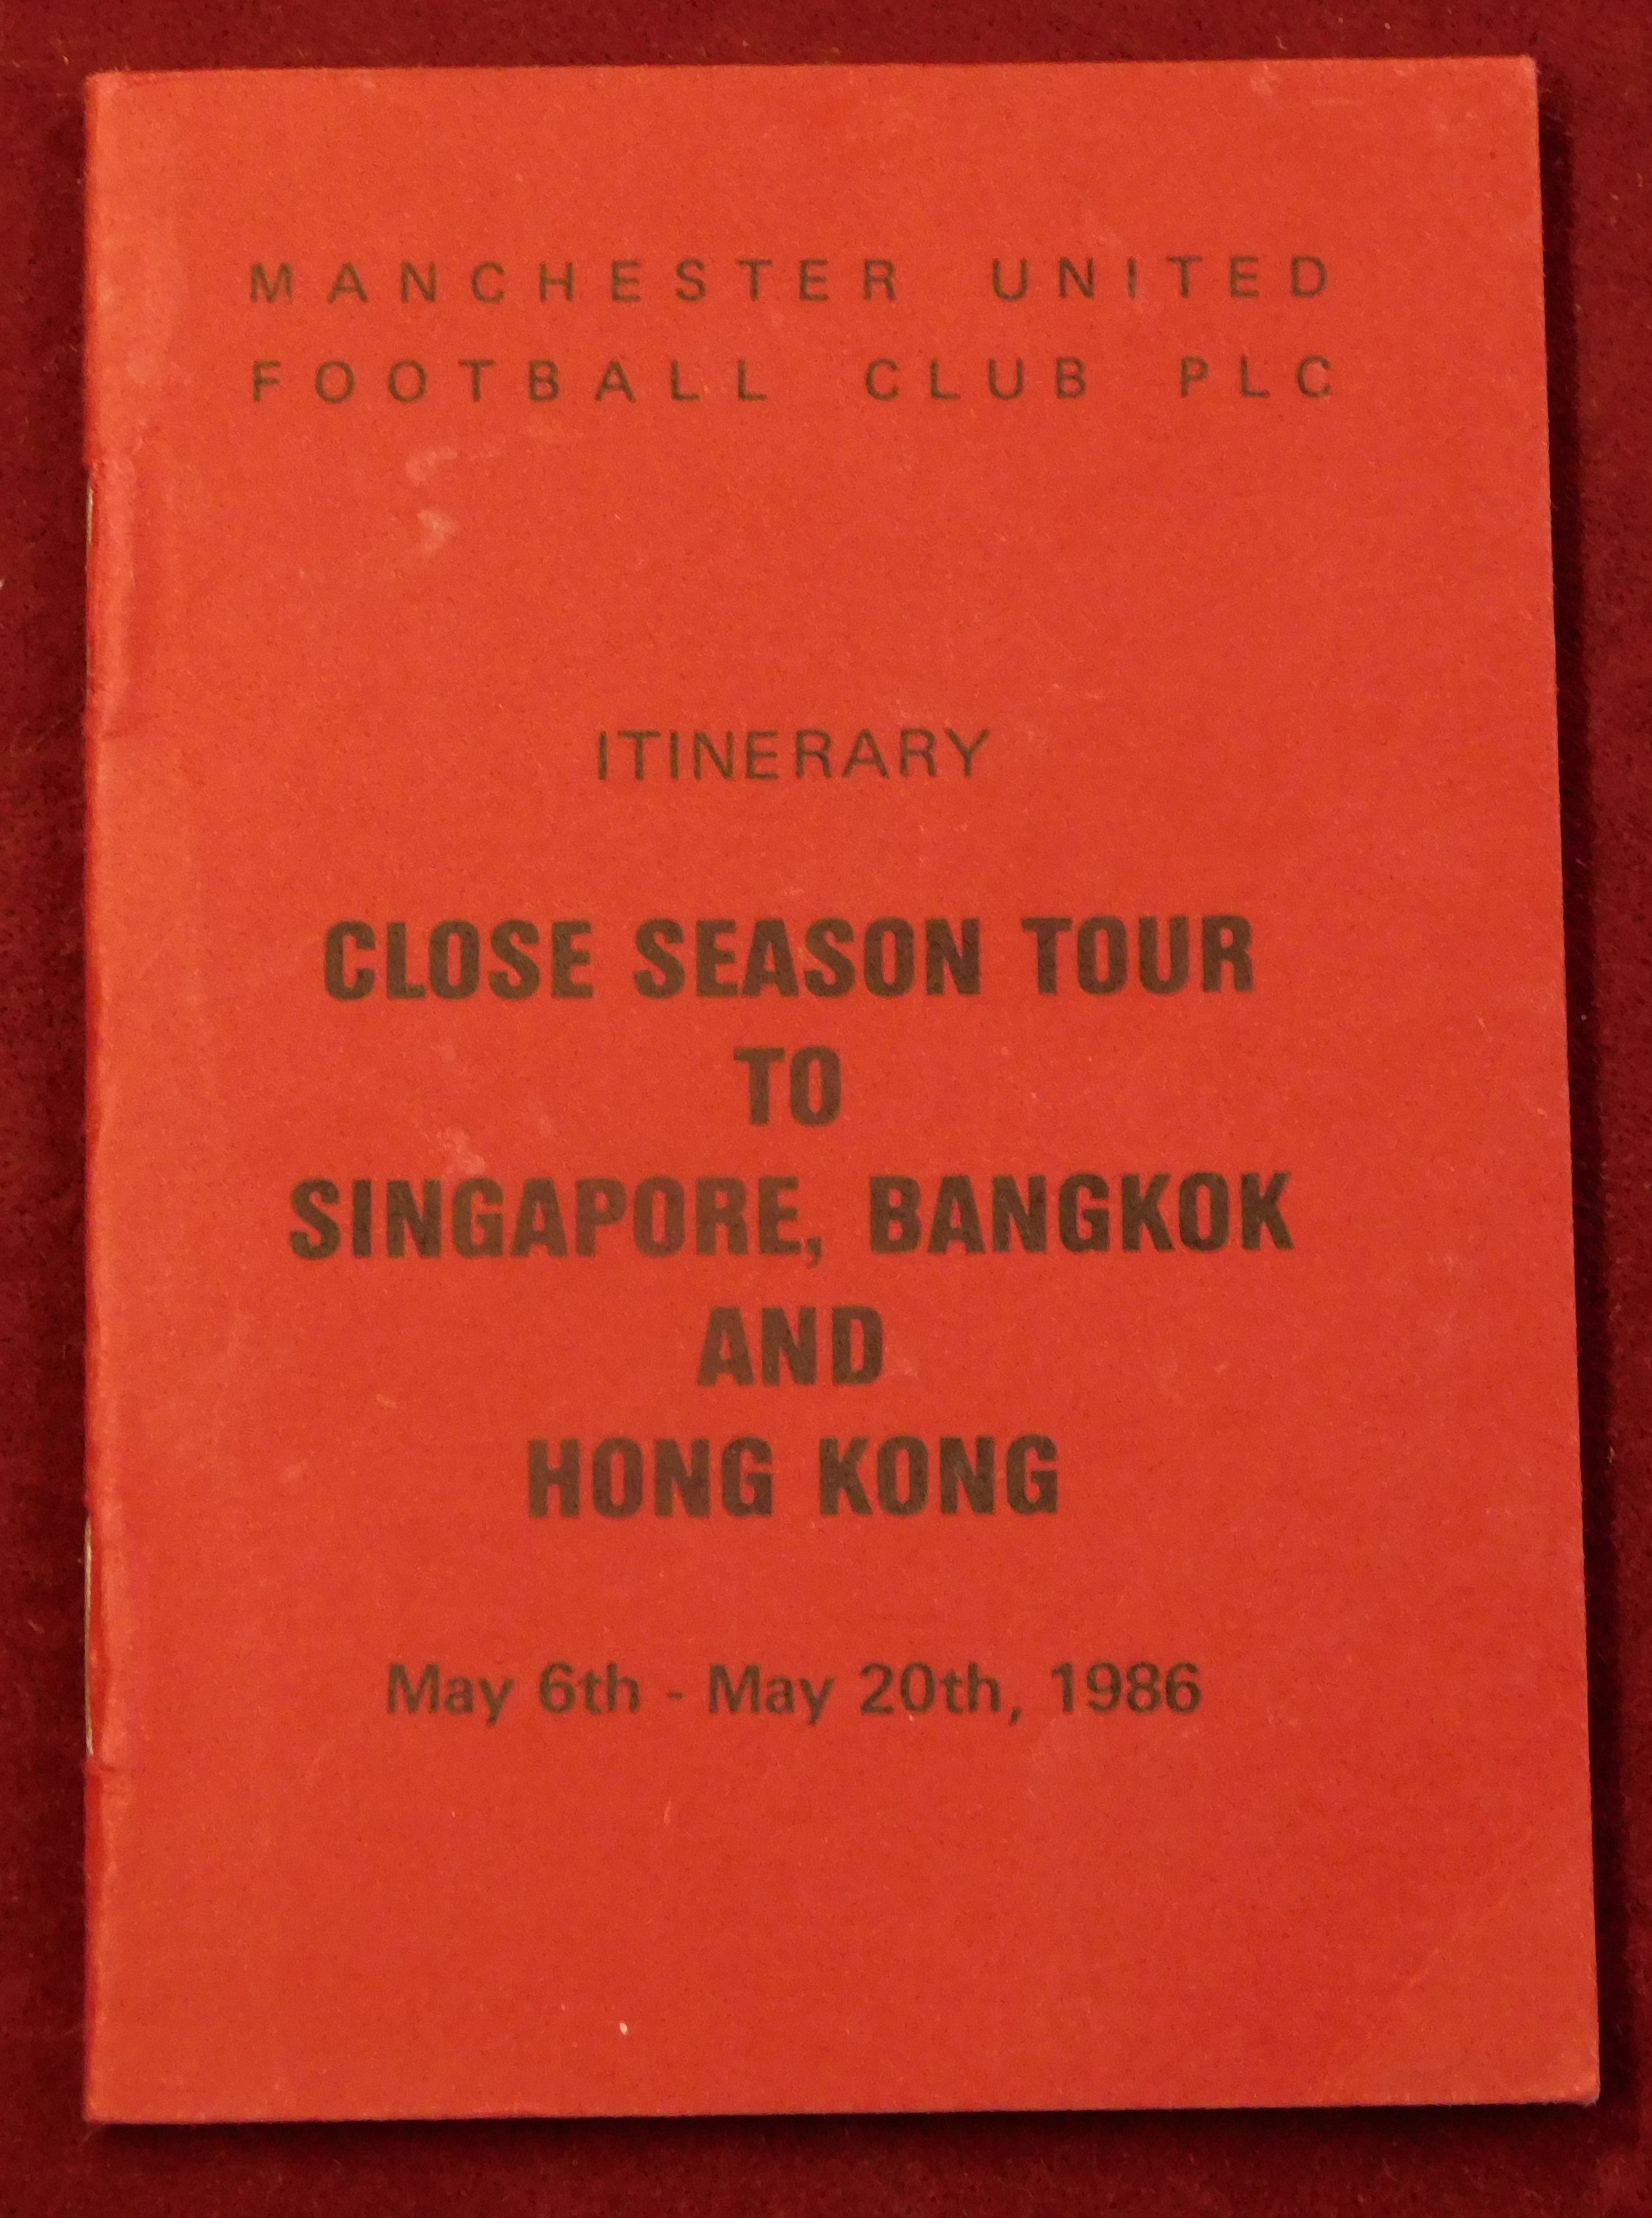 A very rare Manchester United Itinerary card given to Directors and players for the close season